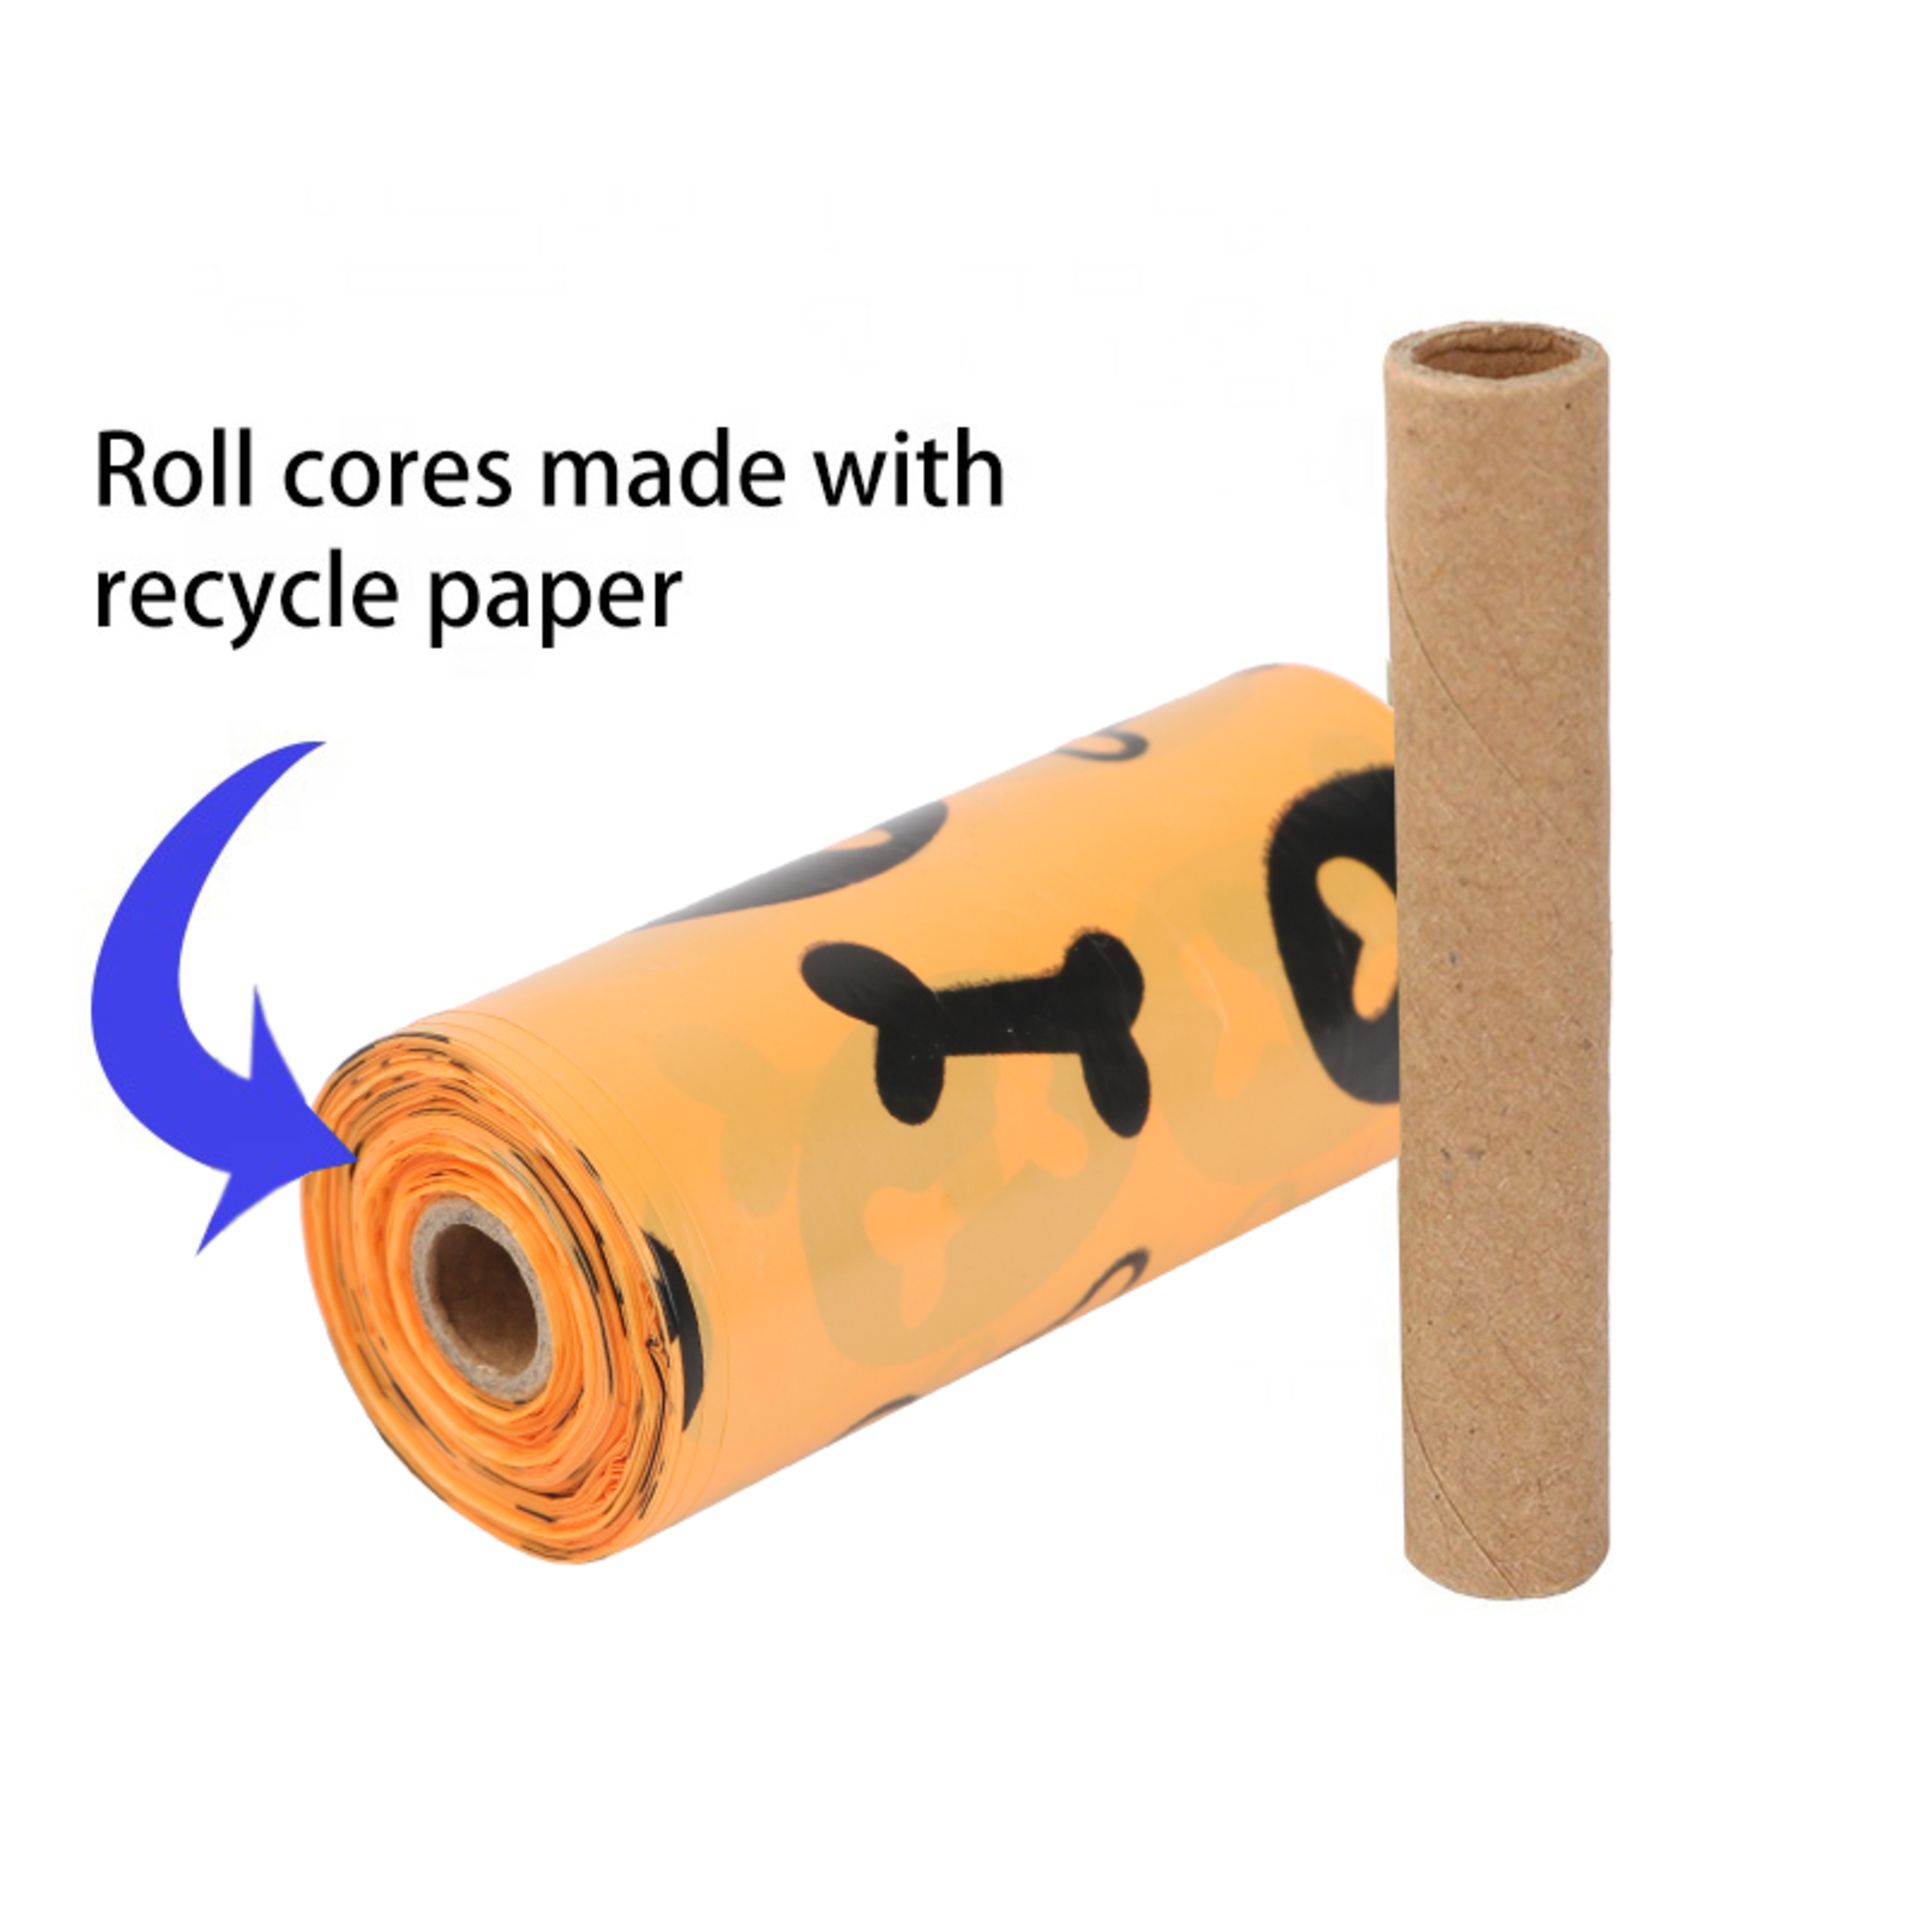 Biodegradeable Leak-Proof Thick and Strong Dog Poop Bag's 1000 rolls - 15 bags per roll - Image 3 of 8